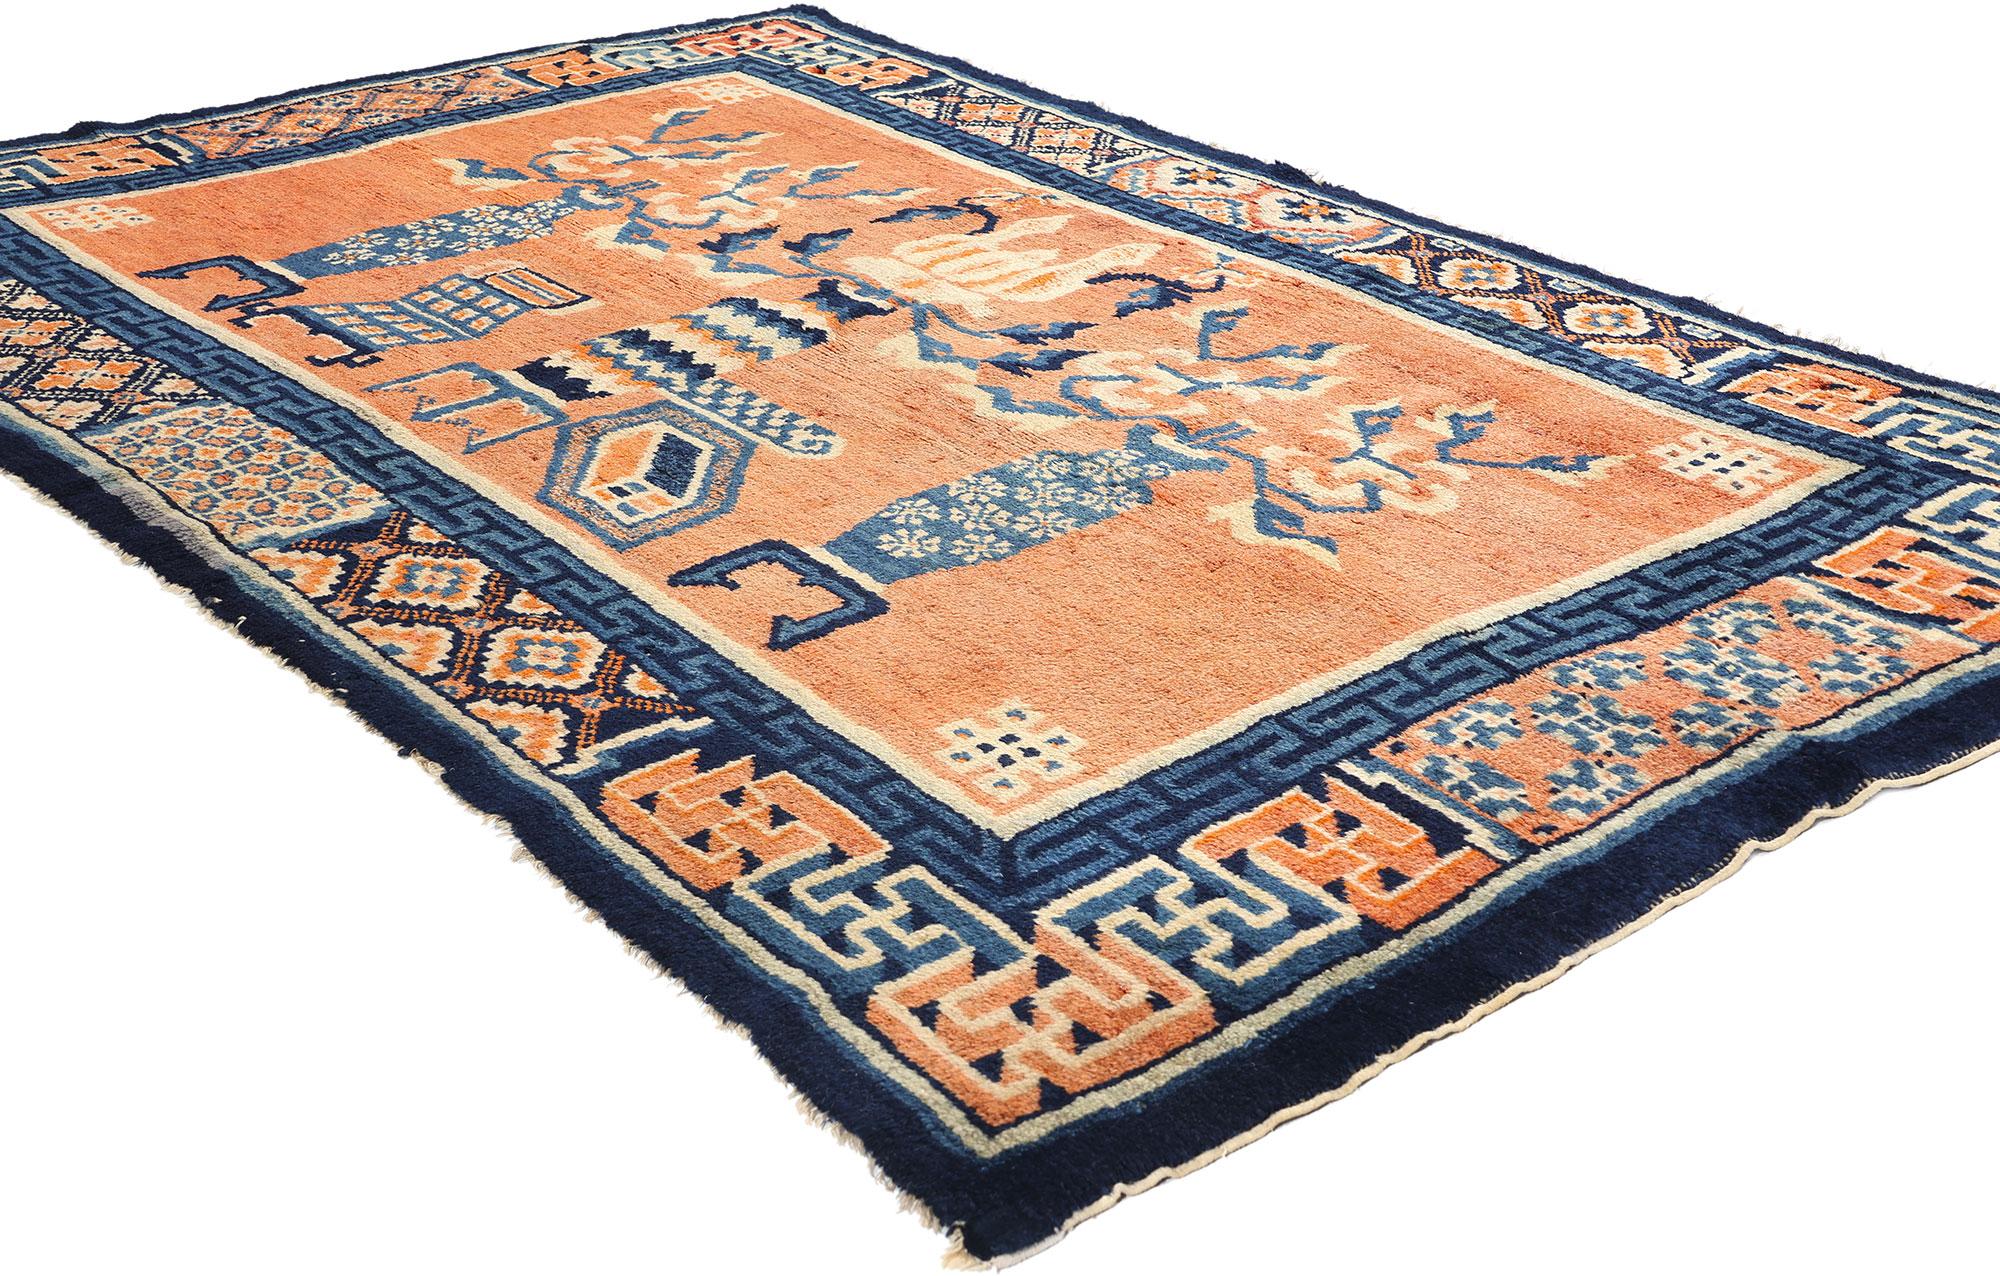 78027 Vintage Orange Chinese Baotou Vase Pictorial Rug, 04'03 x 06'08. Chinese Pictorial Baotou rugs, hailing from Baotou in Inner Mongolia, China, are celebrated for their elaborate designs and narrative richness. Crafted through age-old techniques